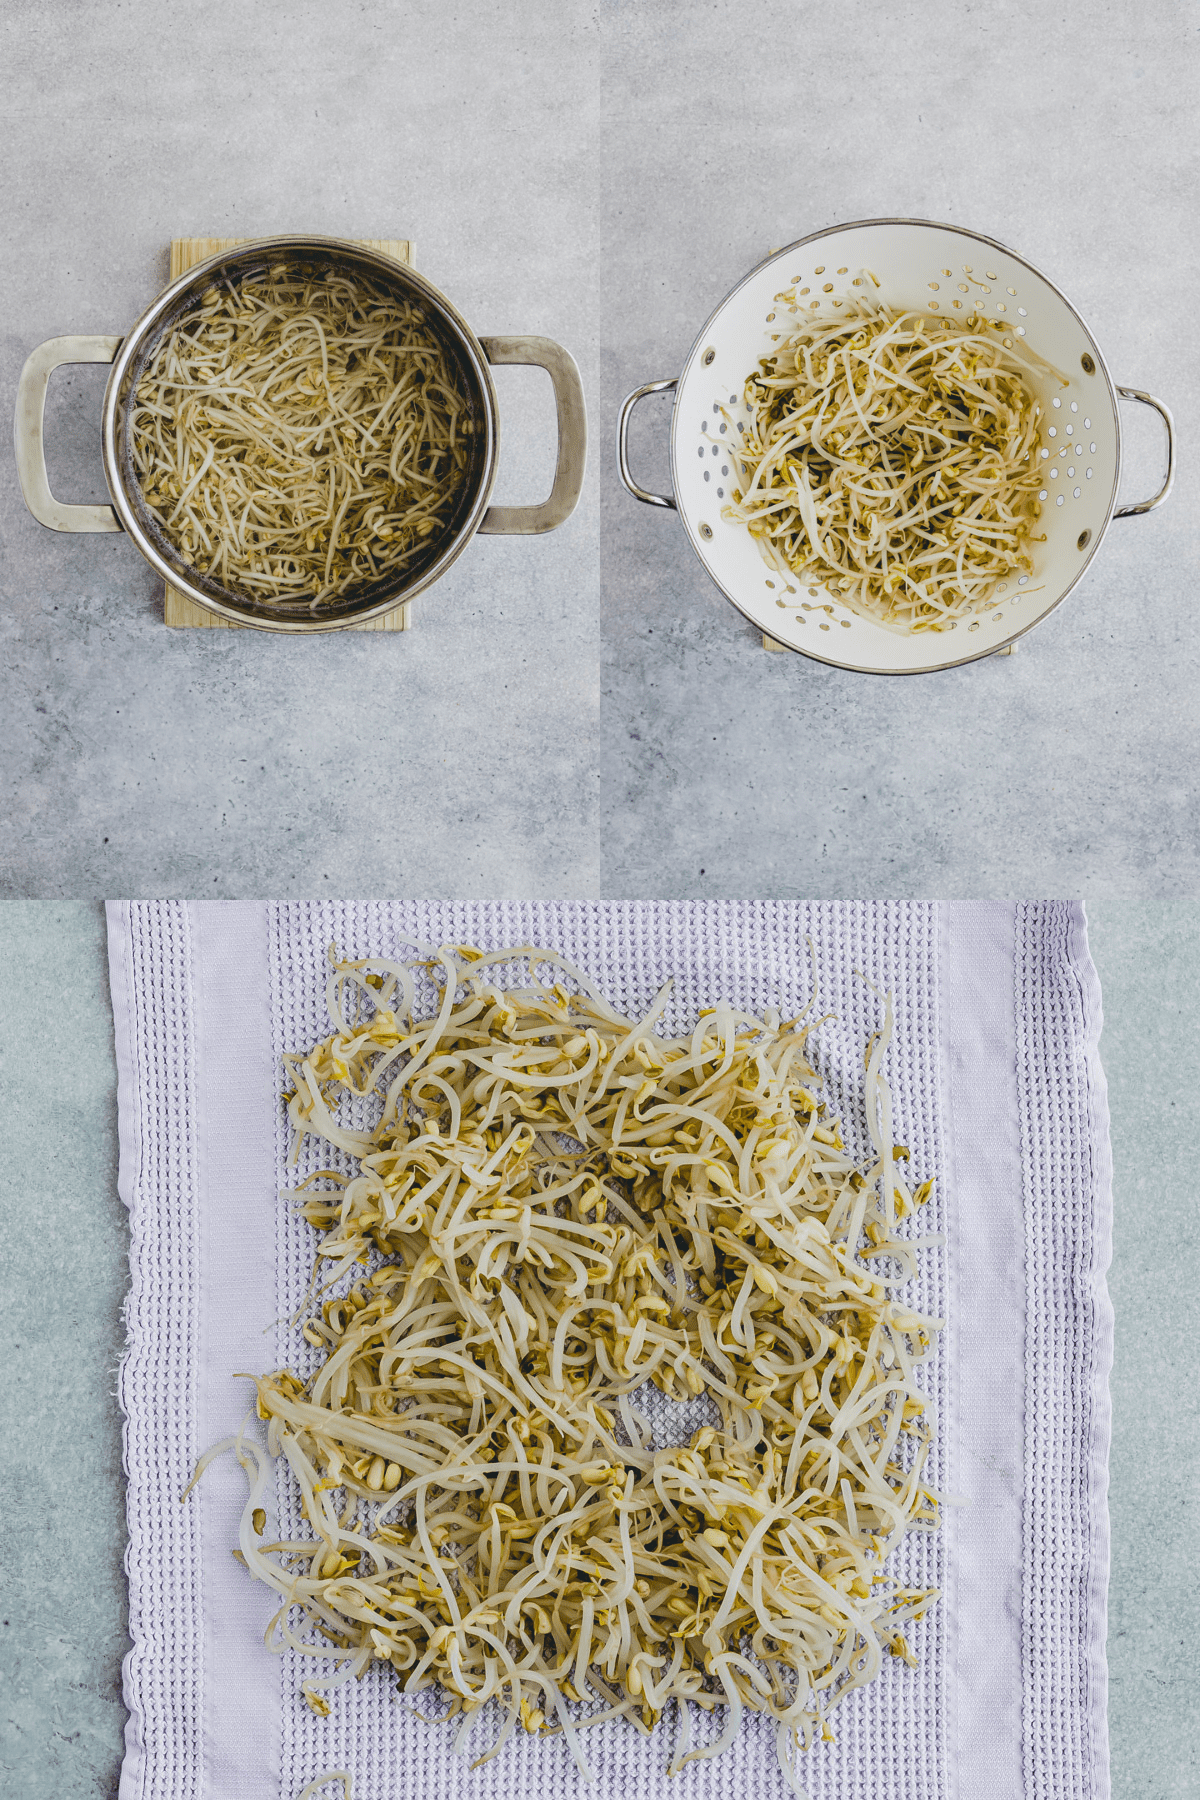 Bean Sprout Salad Recipe Step 1-3